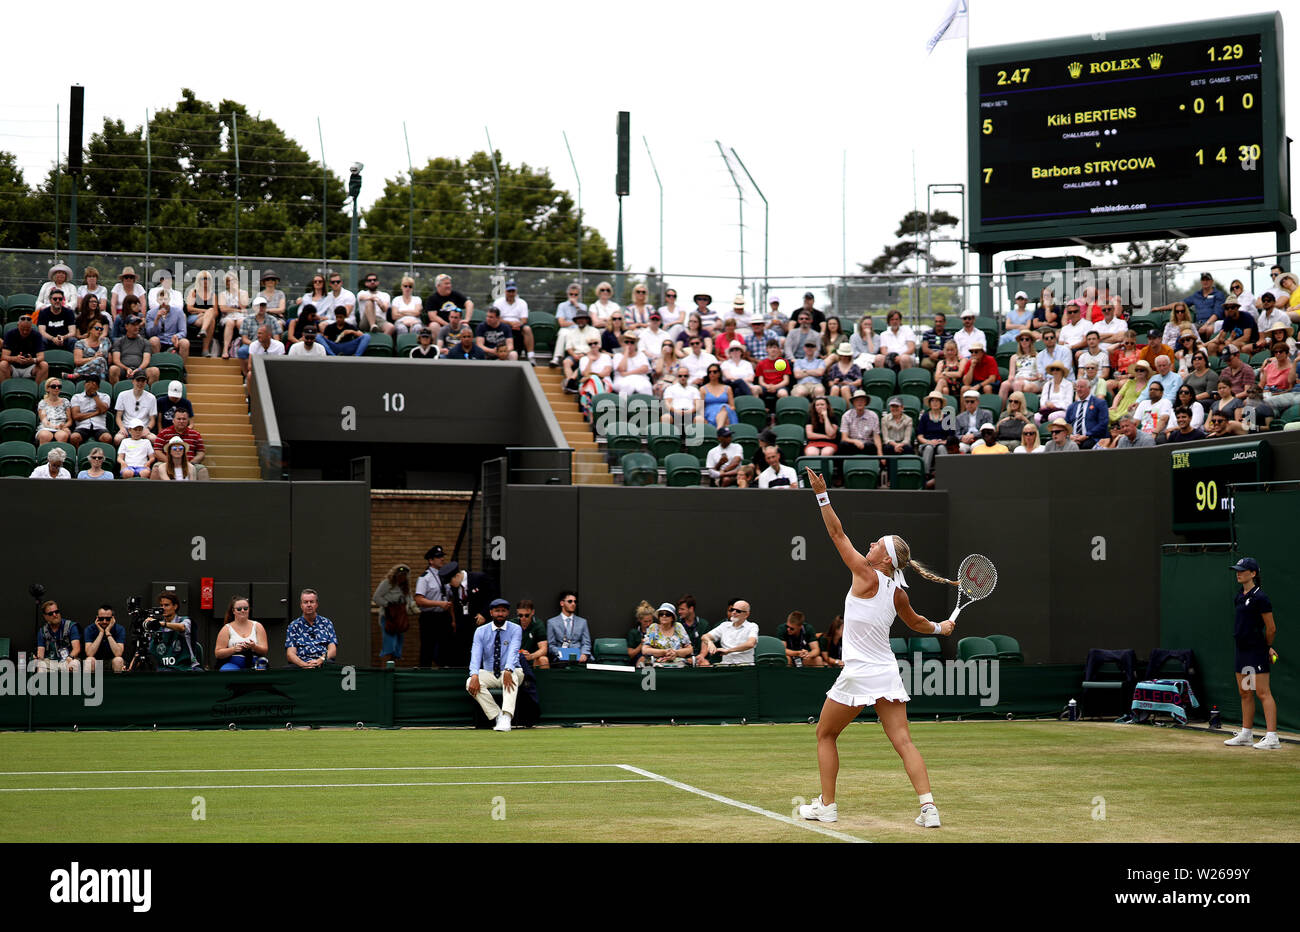 Kiki Bertens in action against Barbora Strycova (not pictured) on day six of the Wimbledon Championships at the All England Lawn Tennis and Croquet Club, Wimbledon. Stock Photo